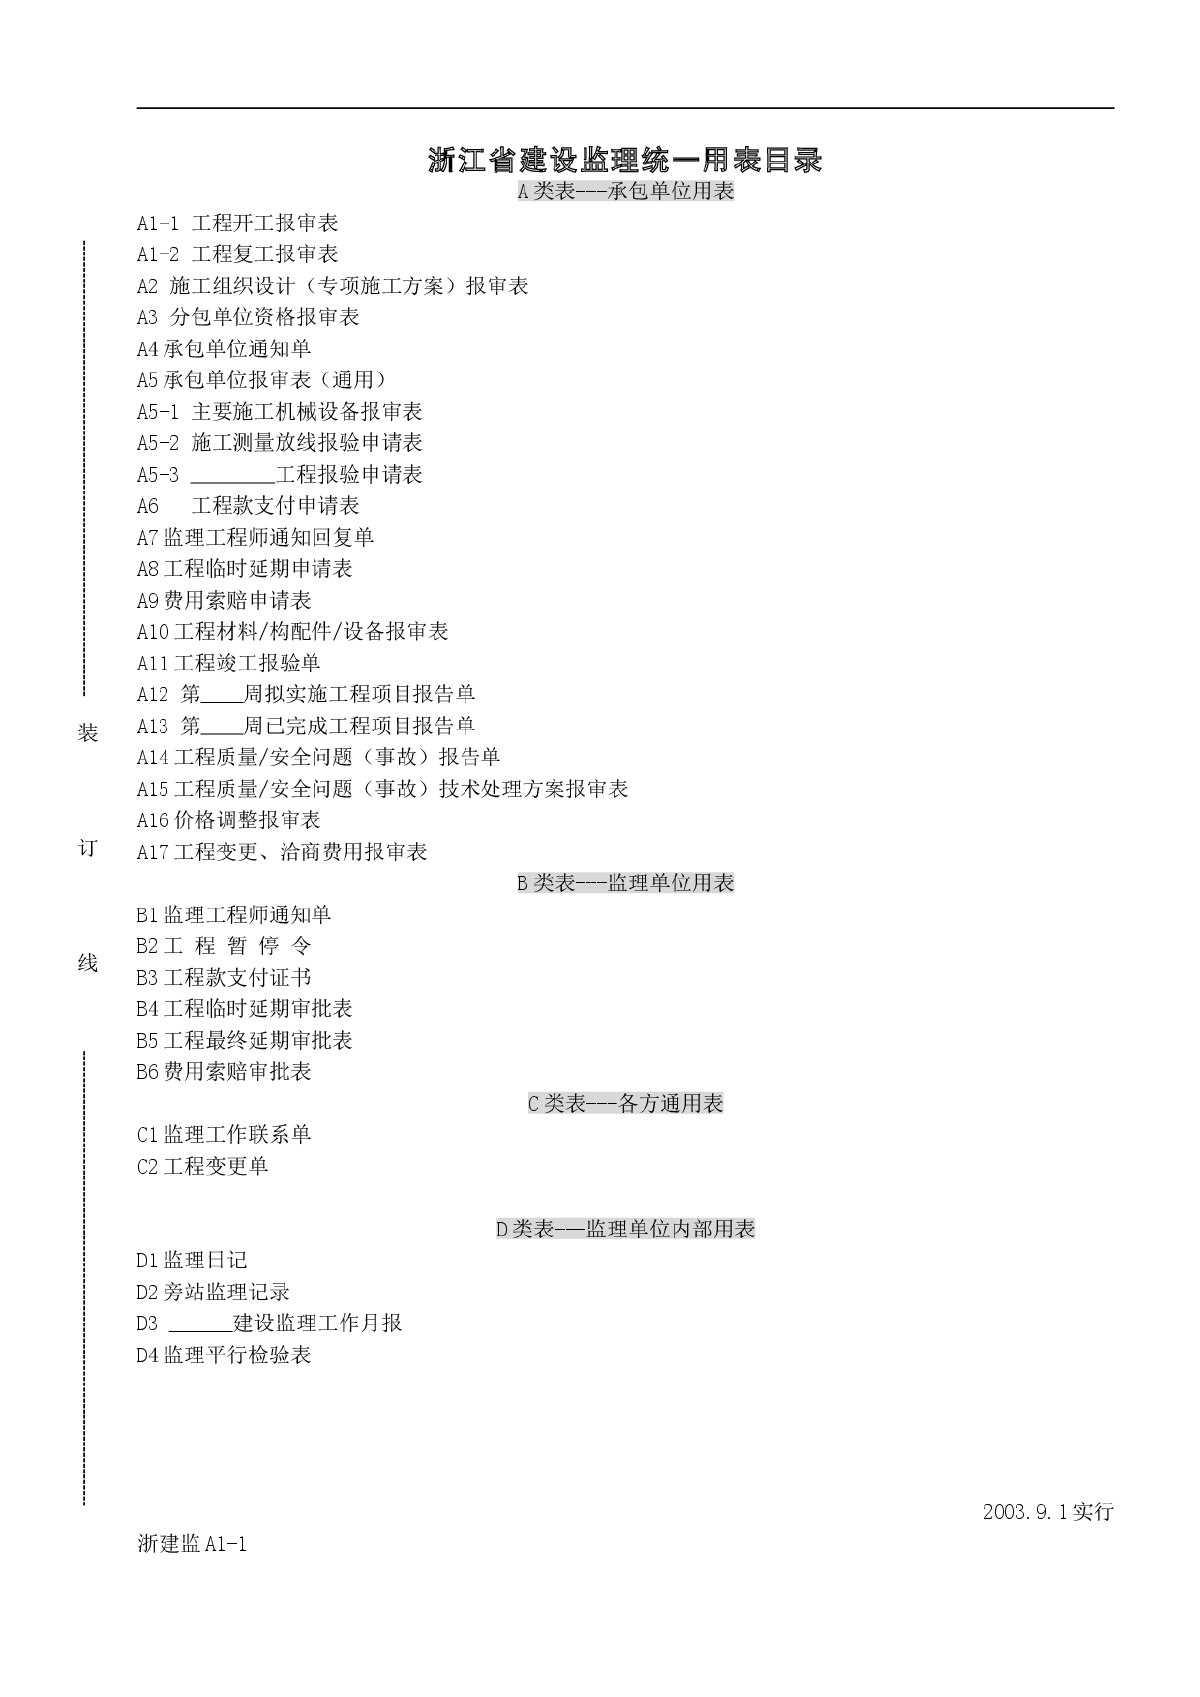  Table of Zhejiang Construction Engineering Supervision Specifications - Figure 1